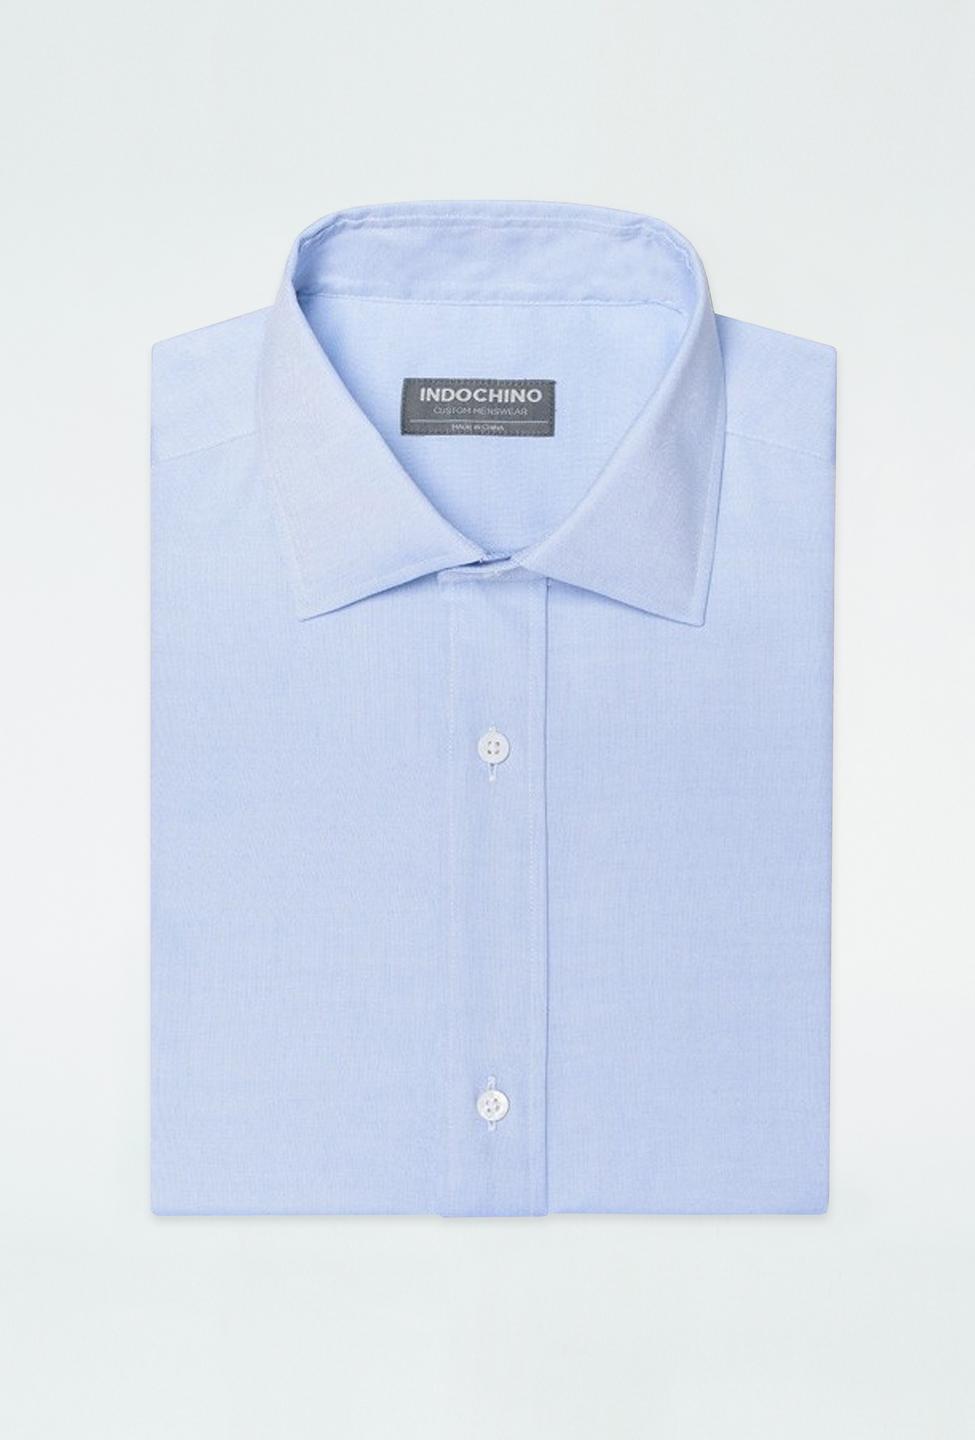 Blue shirt - Helmsley Solid Design from Premium Indochino Collection